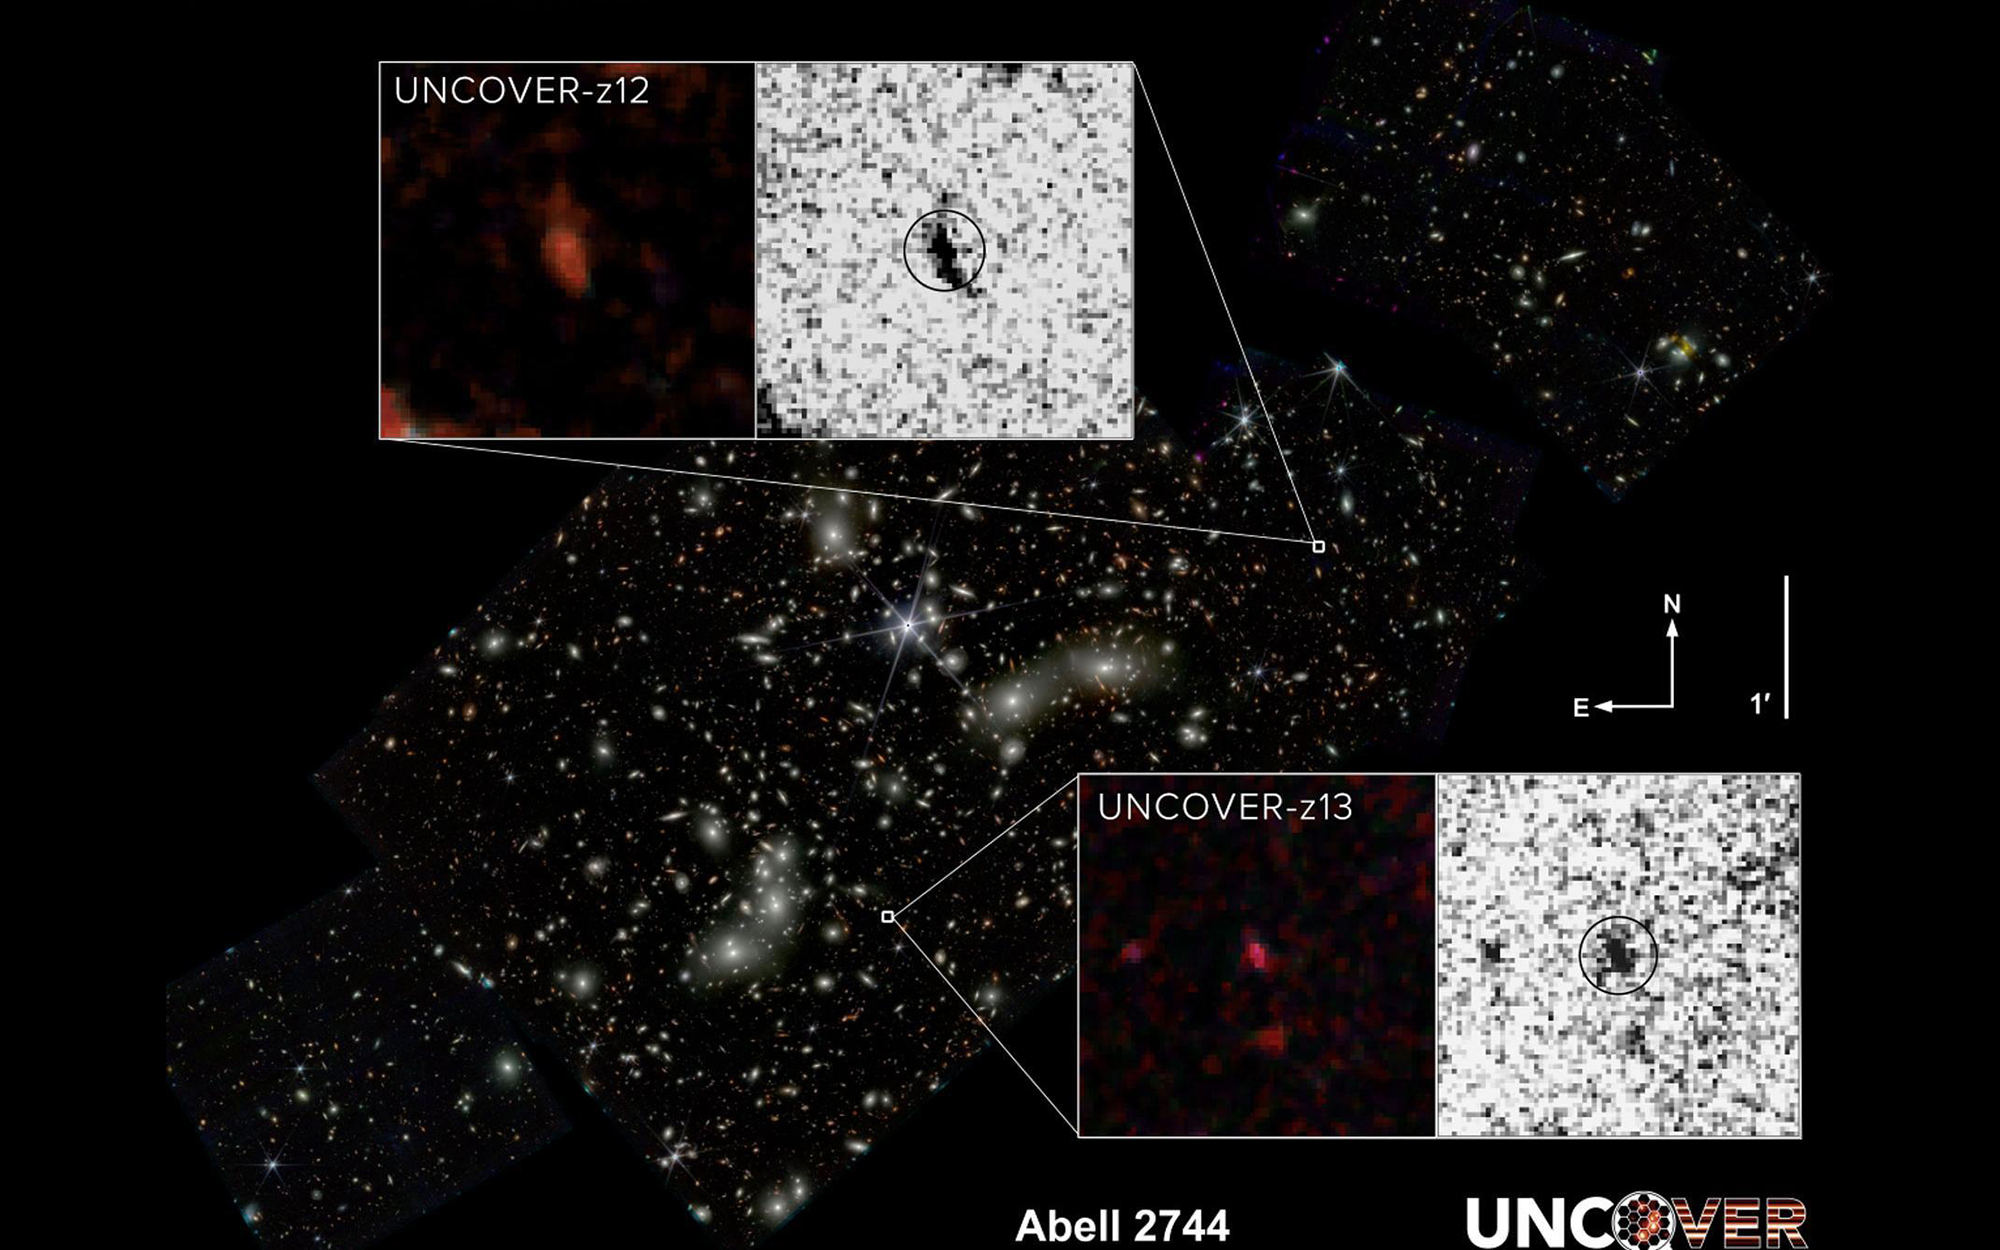 JWST spots two of the most distant galaxies astronomers have ever seen